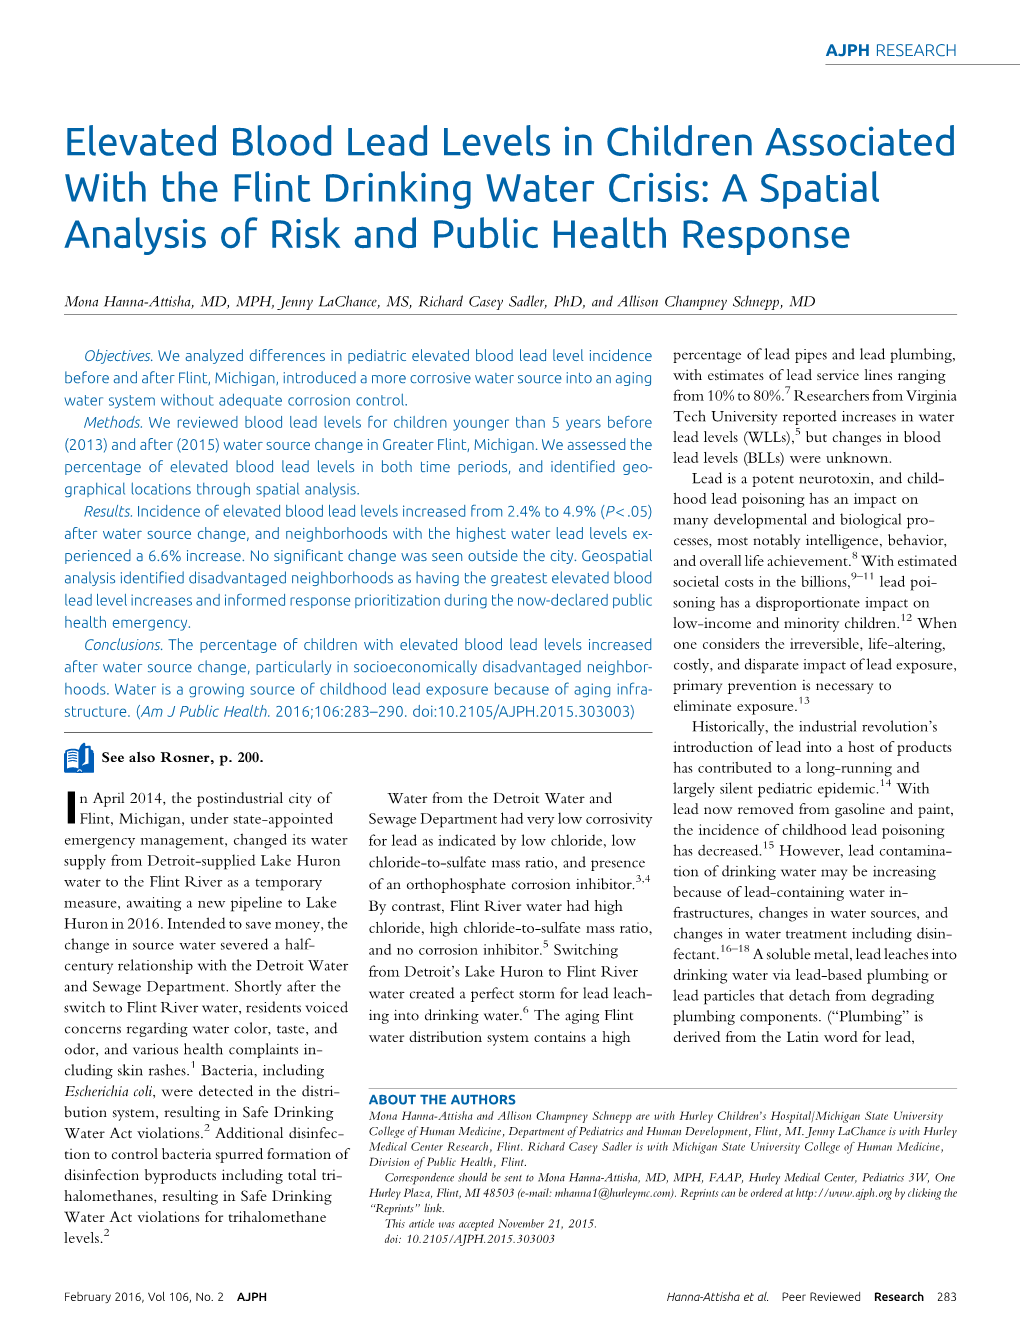 Elevated Blood Lead Levels in Children Associated with the Flint Drinking Water Crisis: a Spatial Analysis of Risk and Public Health Response